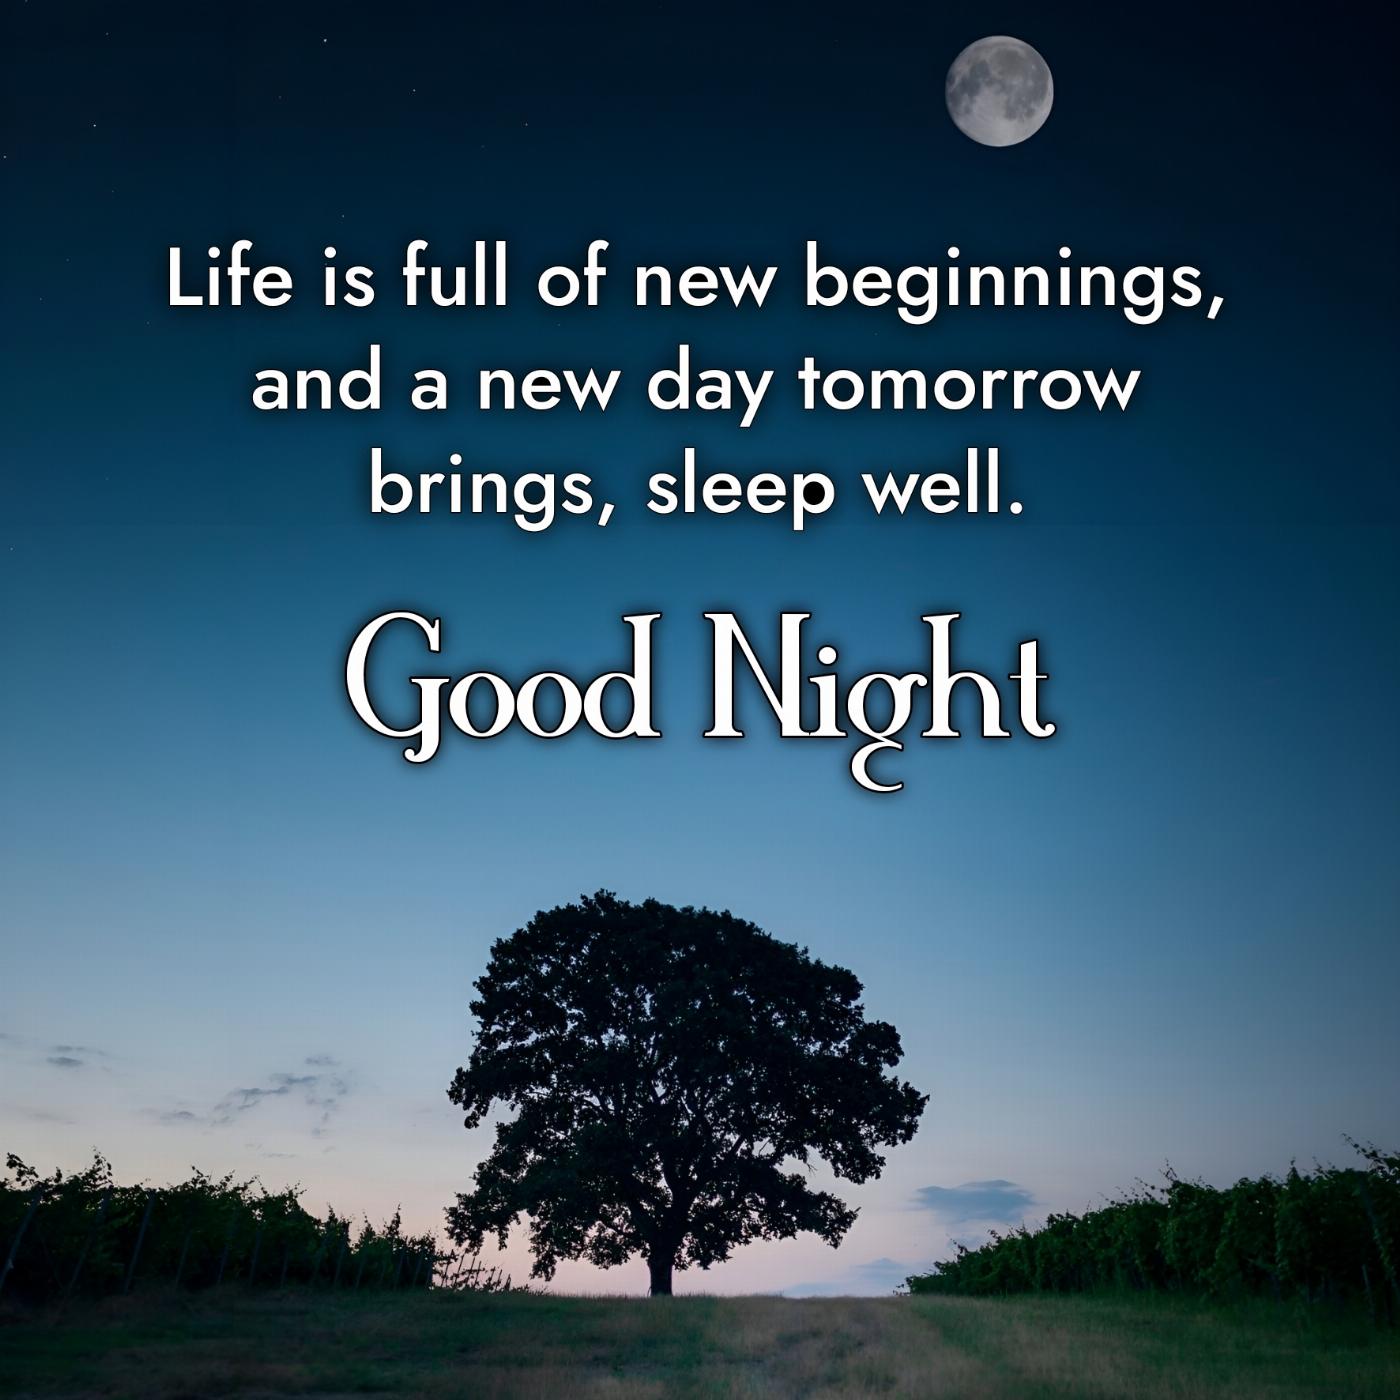 Life is full of new beginnings and a new day tomorrow brings